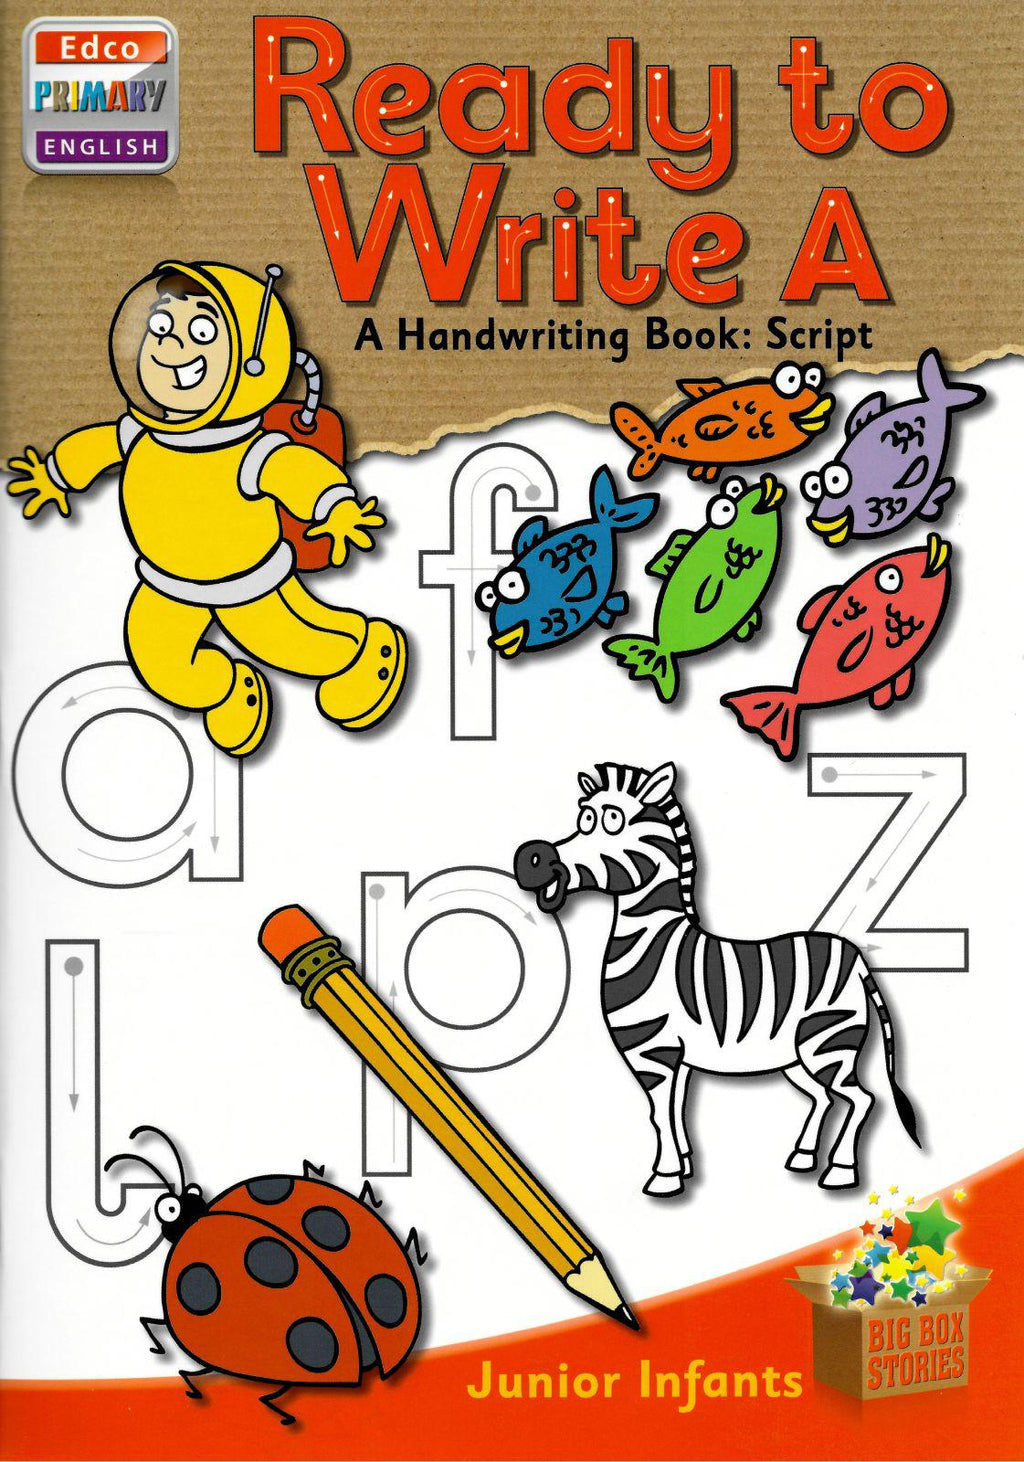 Ready to Write A - Junior Infants - Script